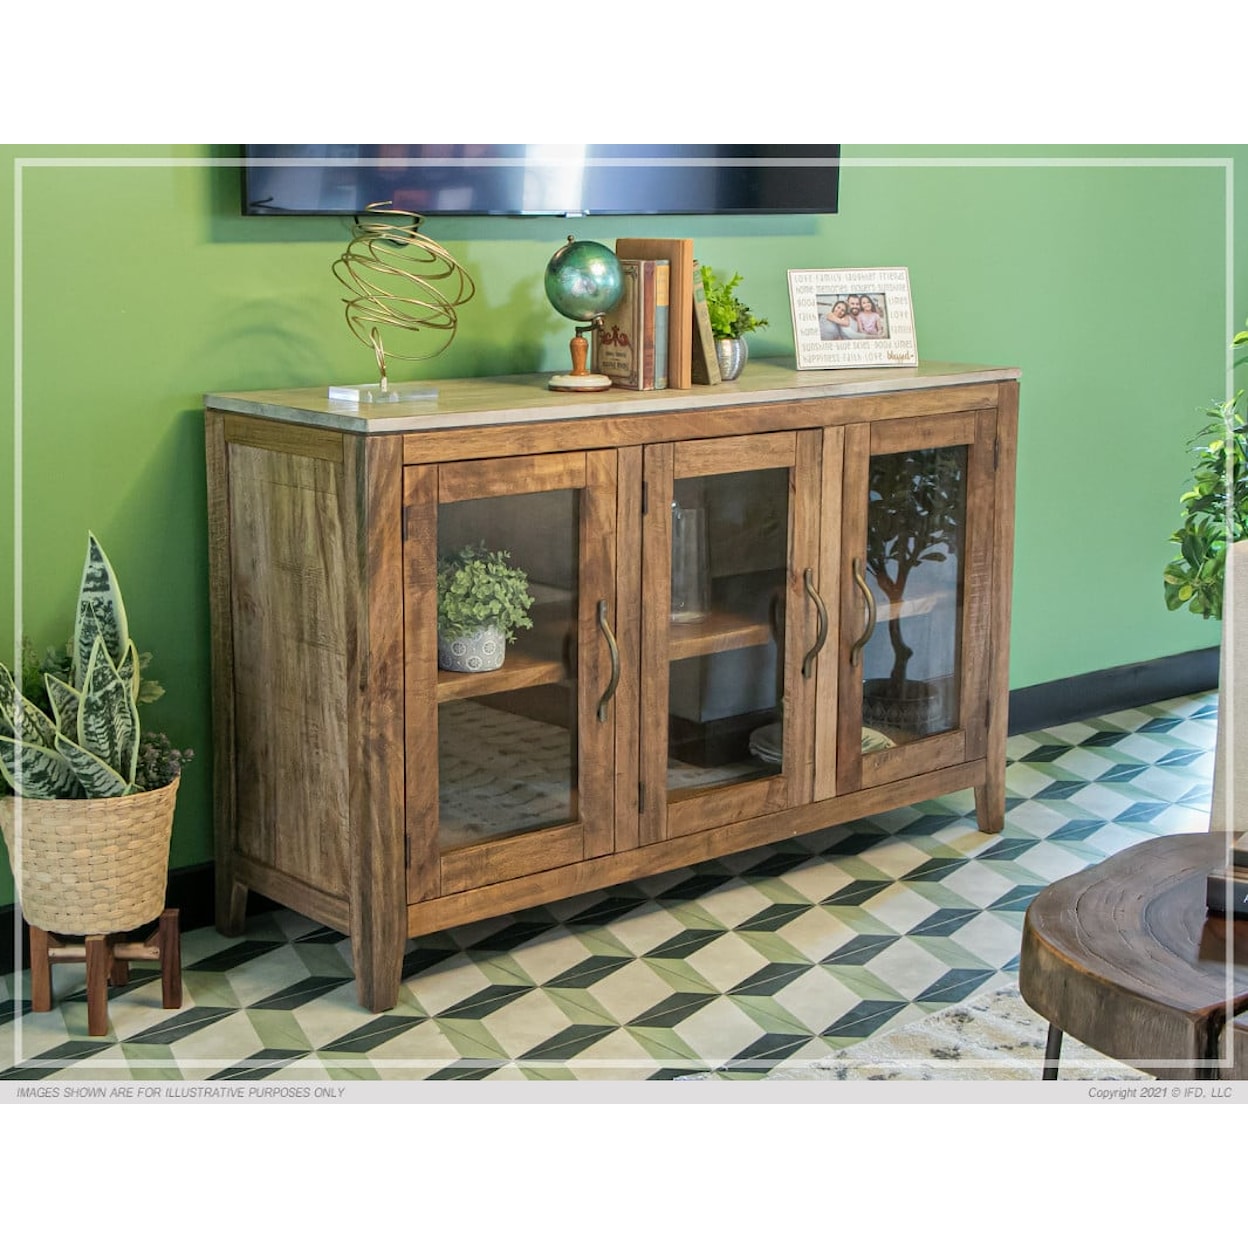 International Furniture Direct Tulum 3-Door Console Table with Storage